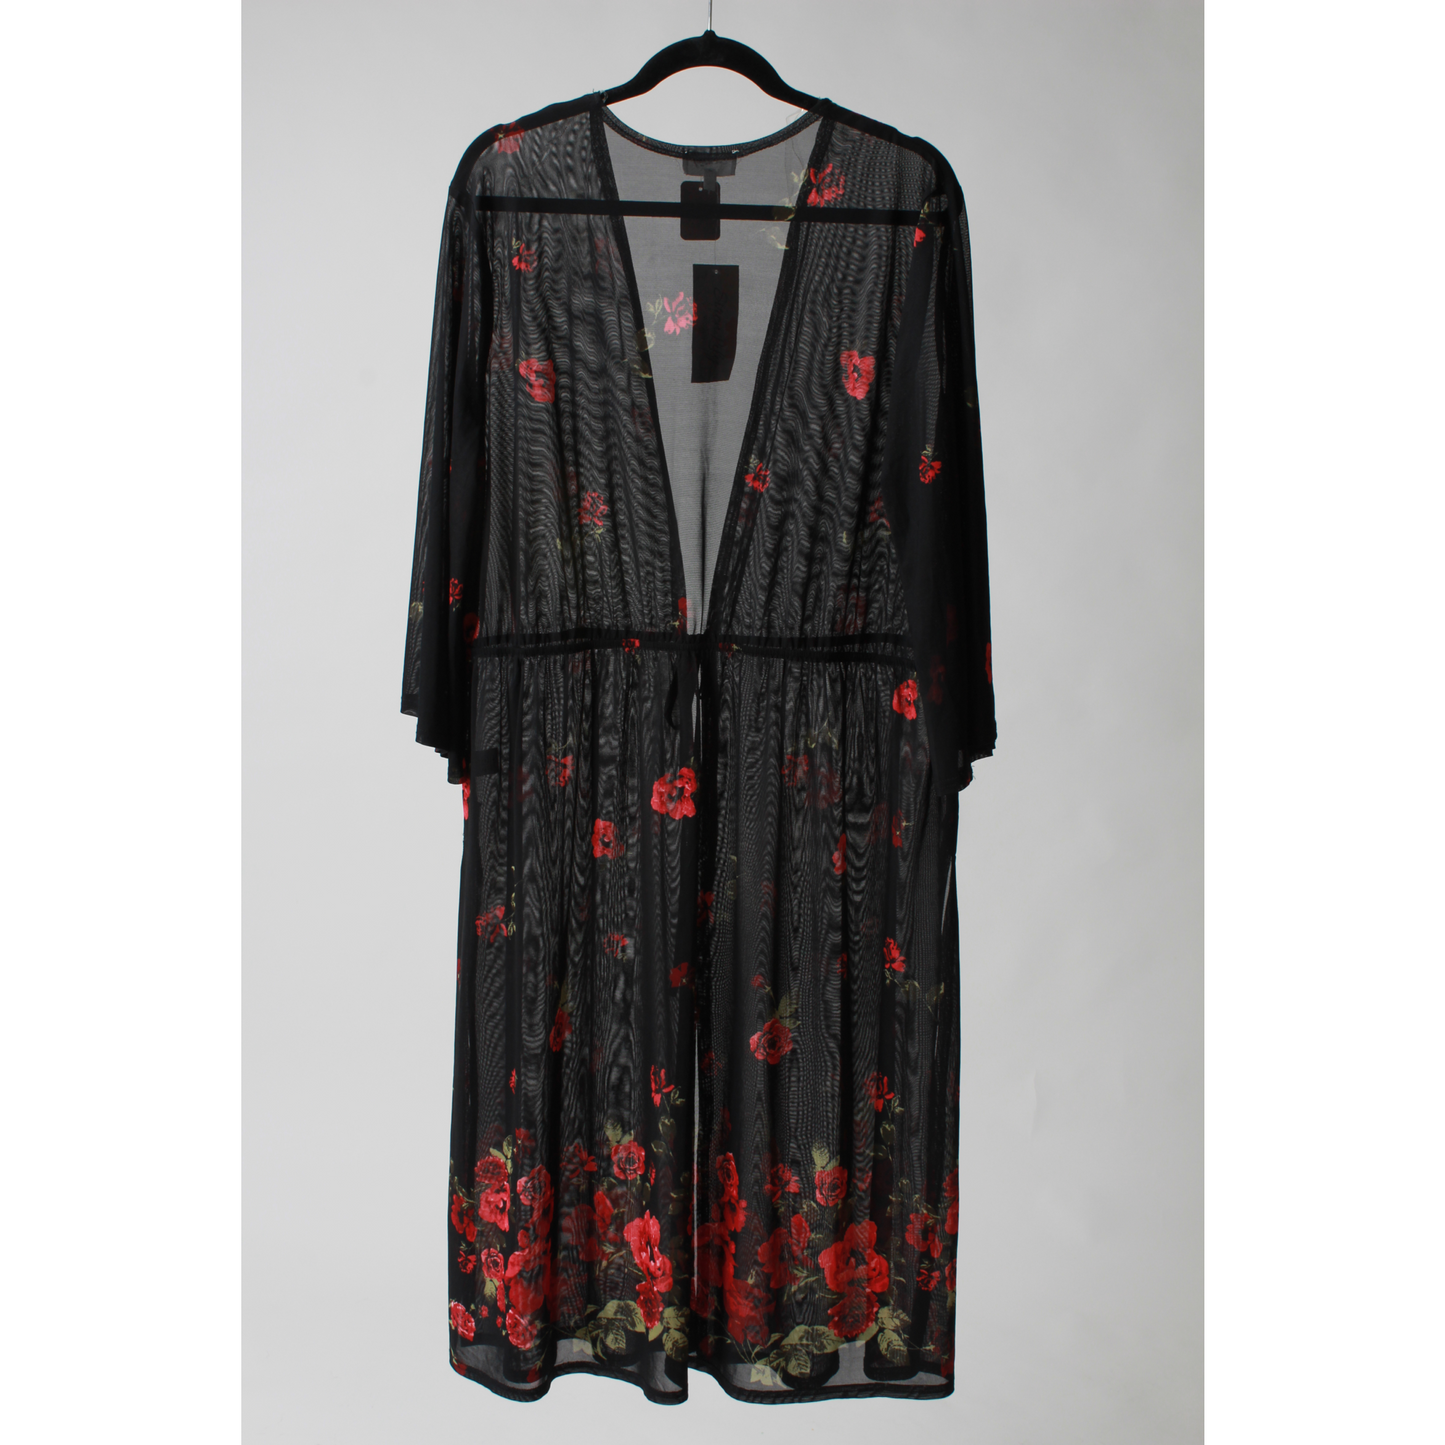 Floral Mesh Cardigan/Cover Up (2X)